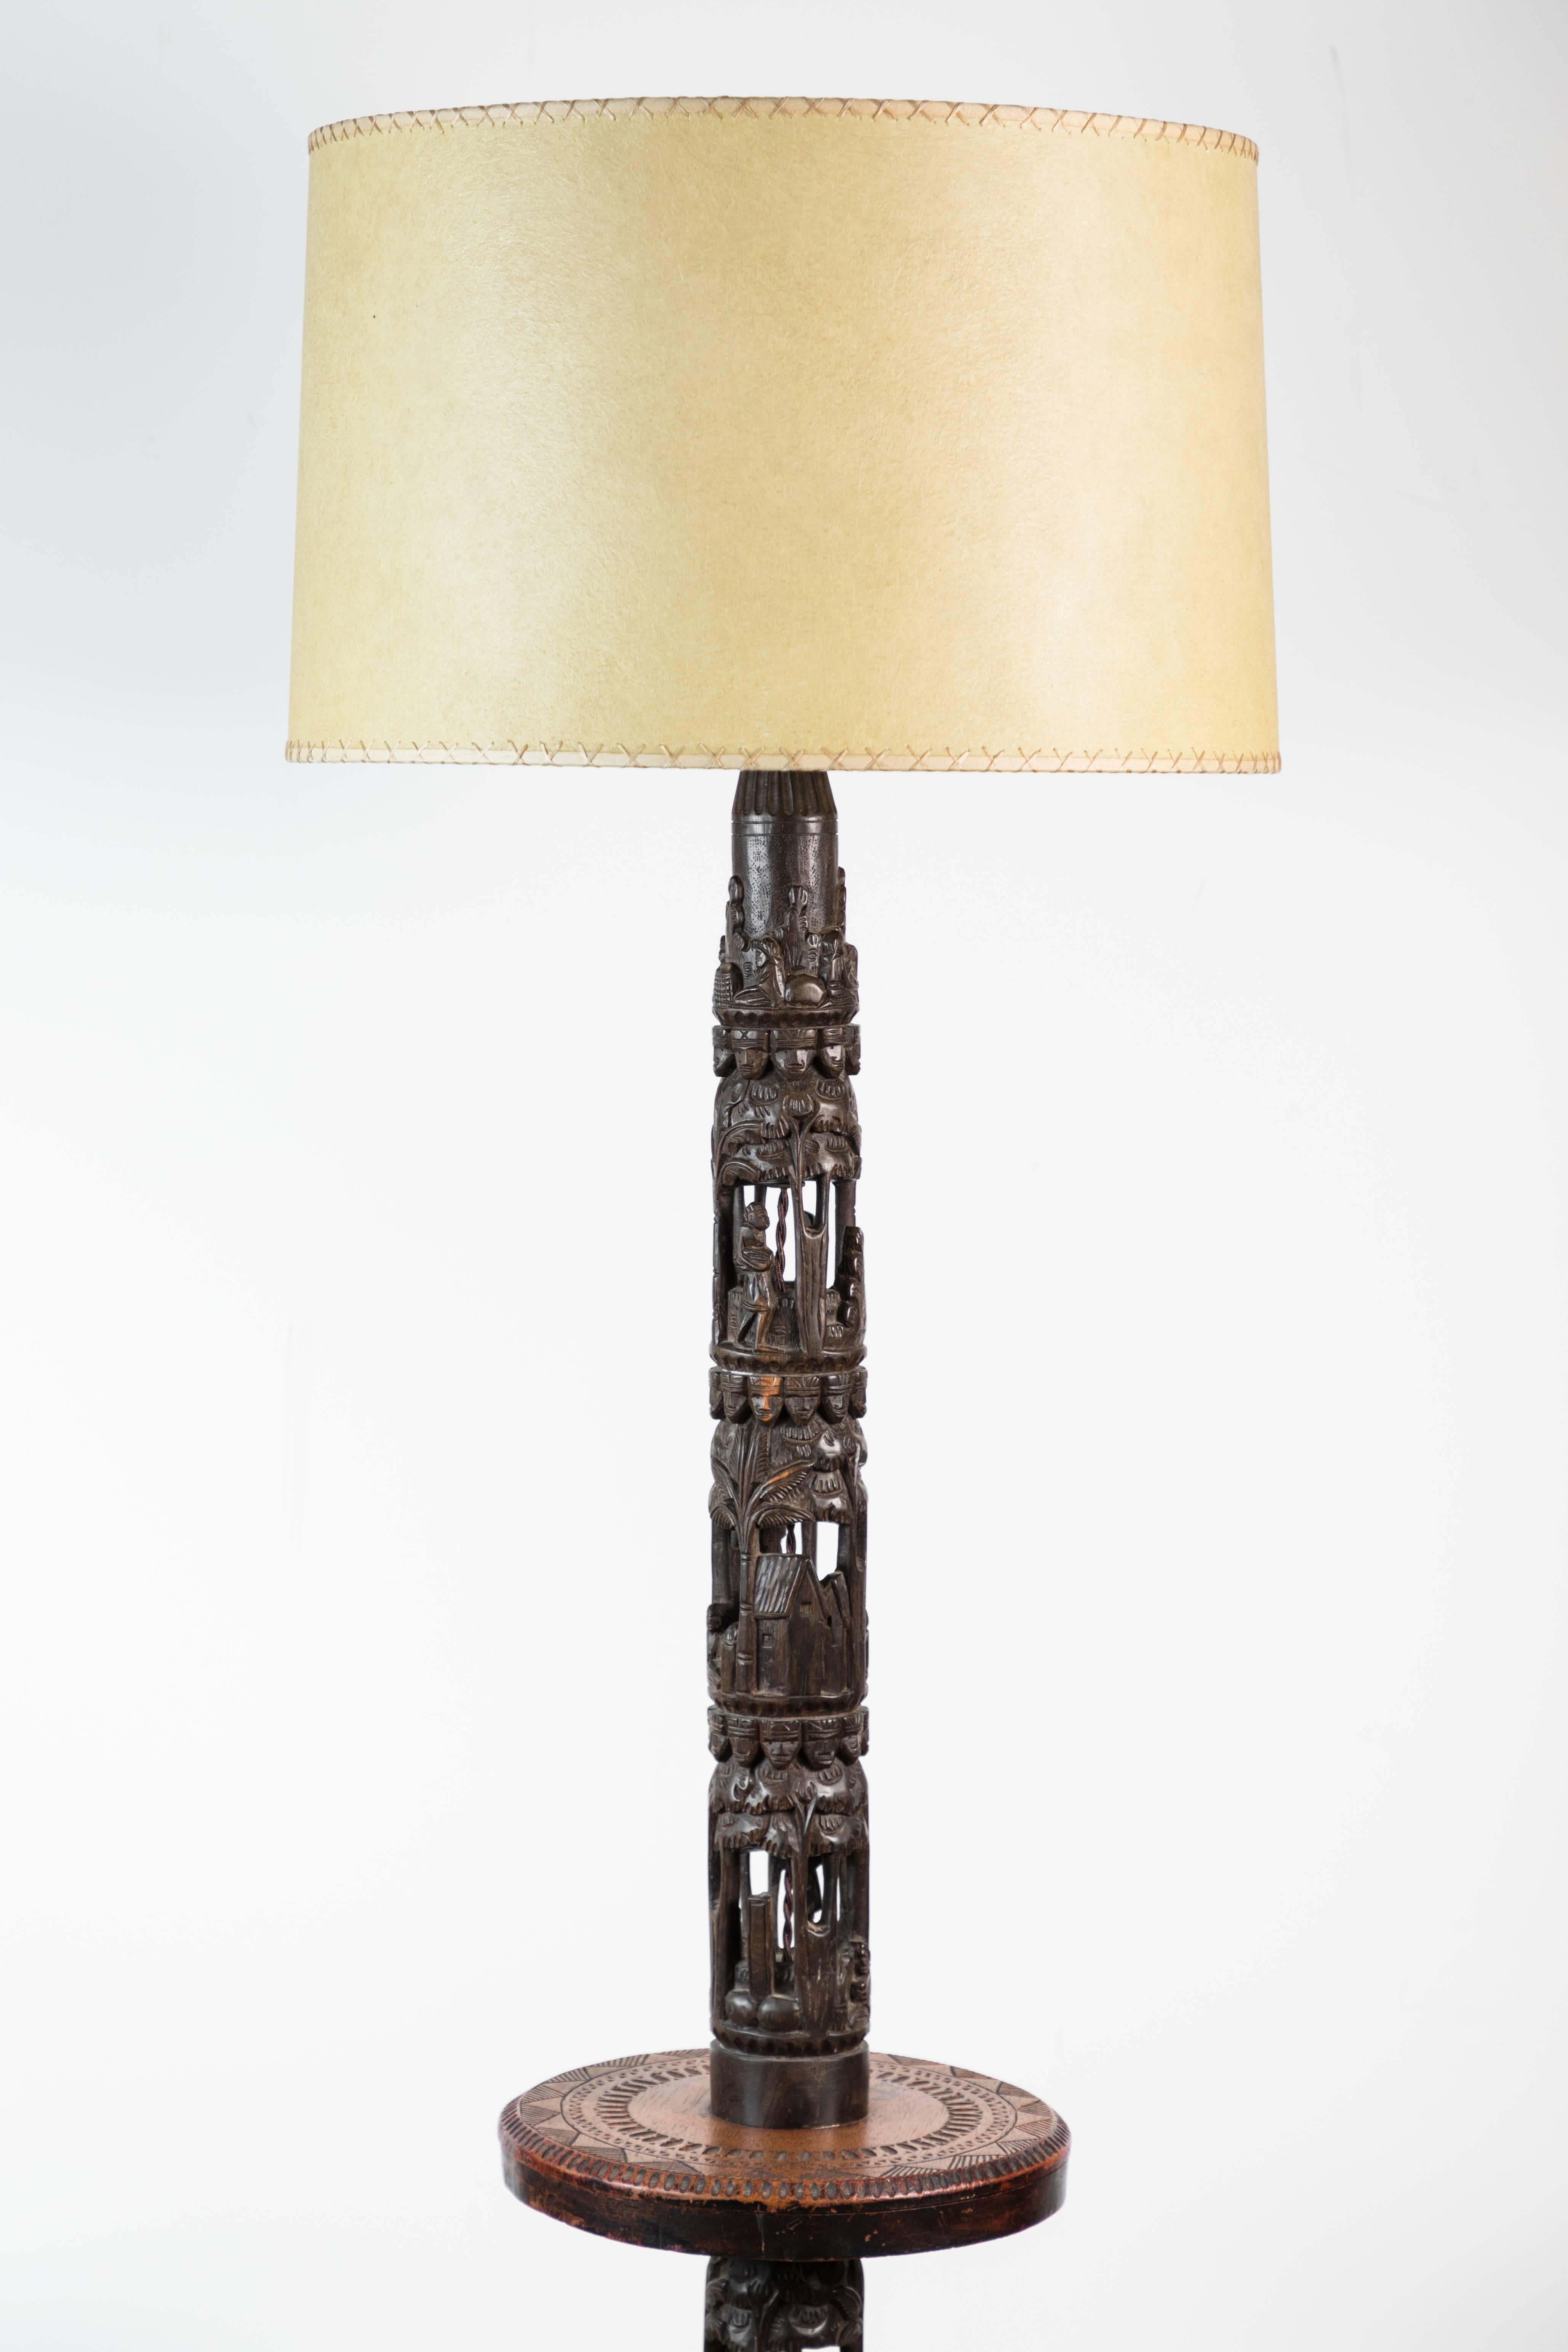 Beautiful floor lamp of African hand-carvings assembled into a floor lamp in France, mid-20th century.
Fertility symbolism throughout. Intricate details hand-carved details. Unknown African regional tribe. New wiring and new custom laced banded